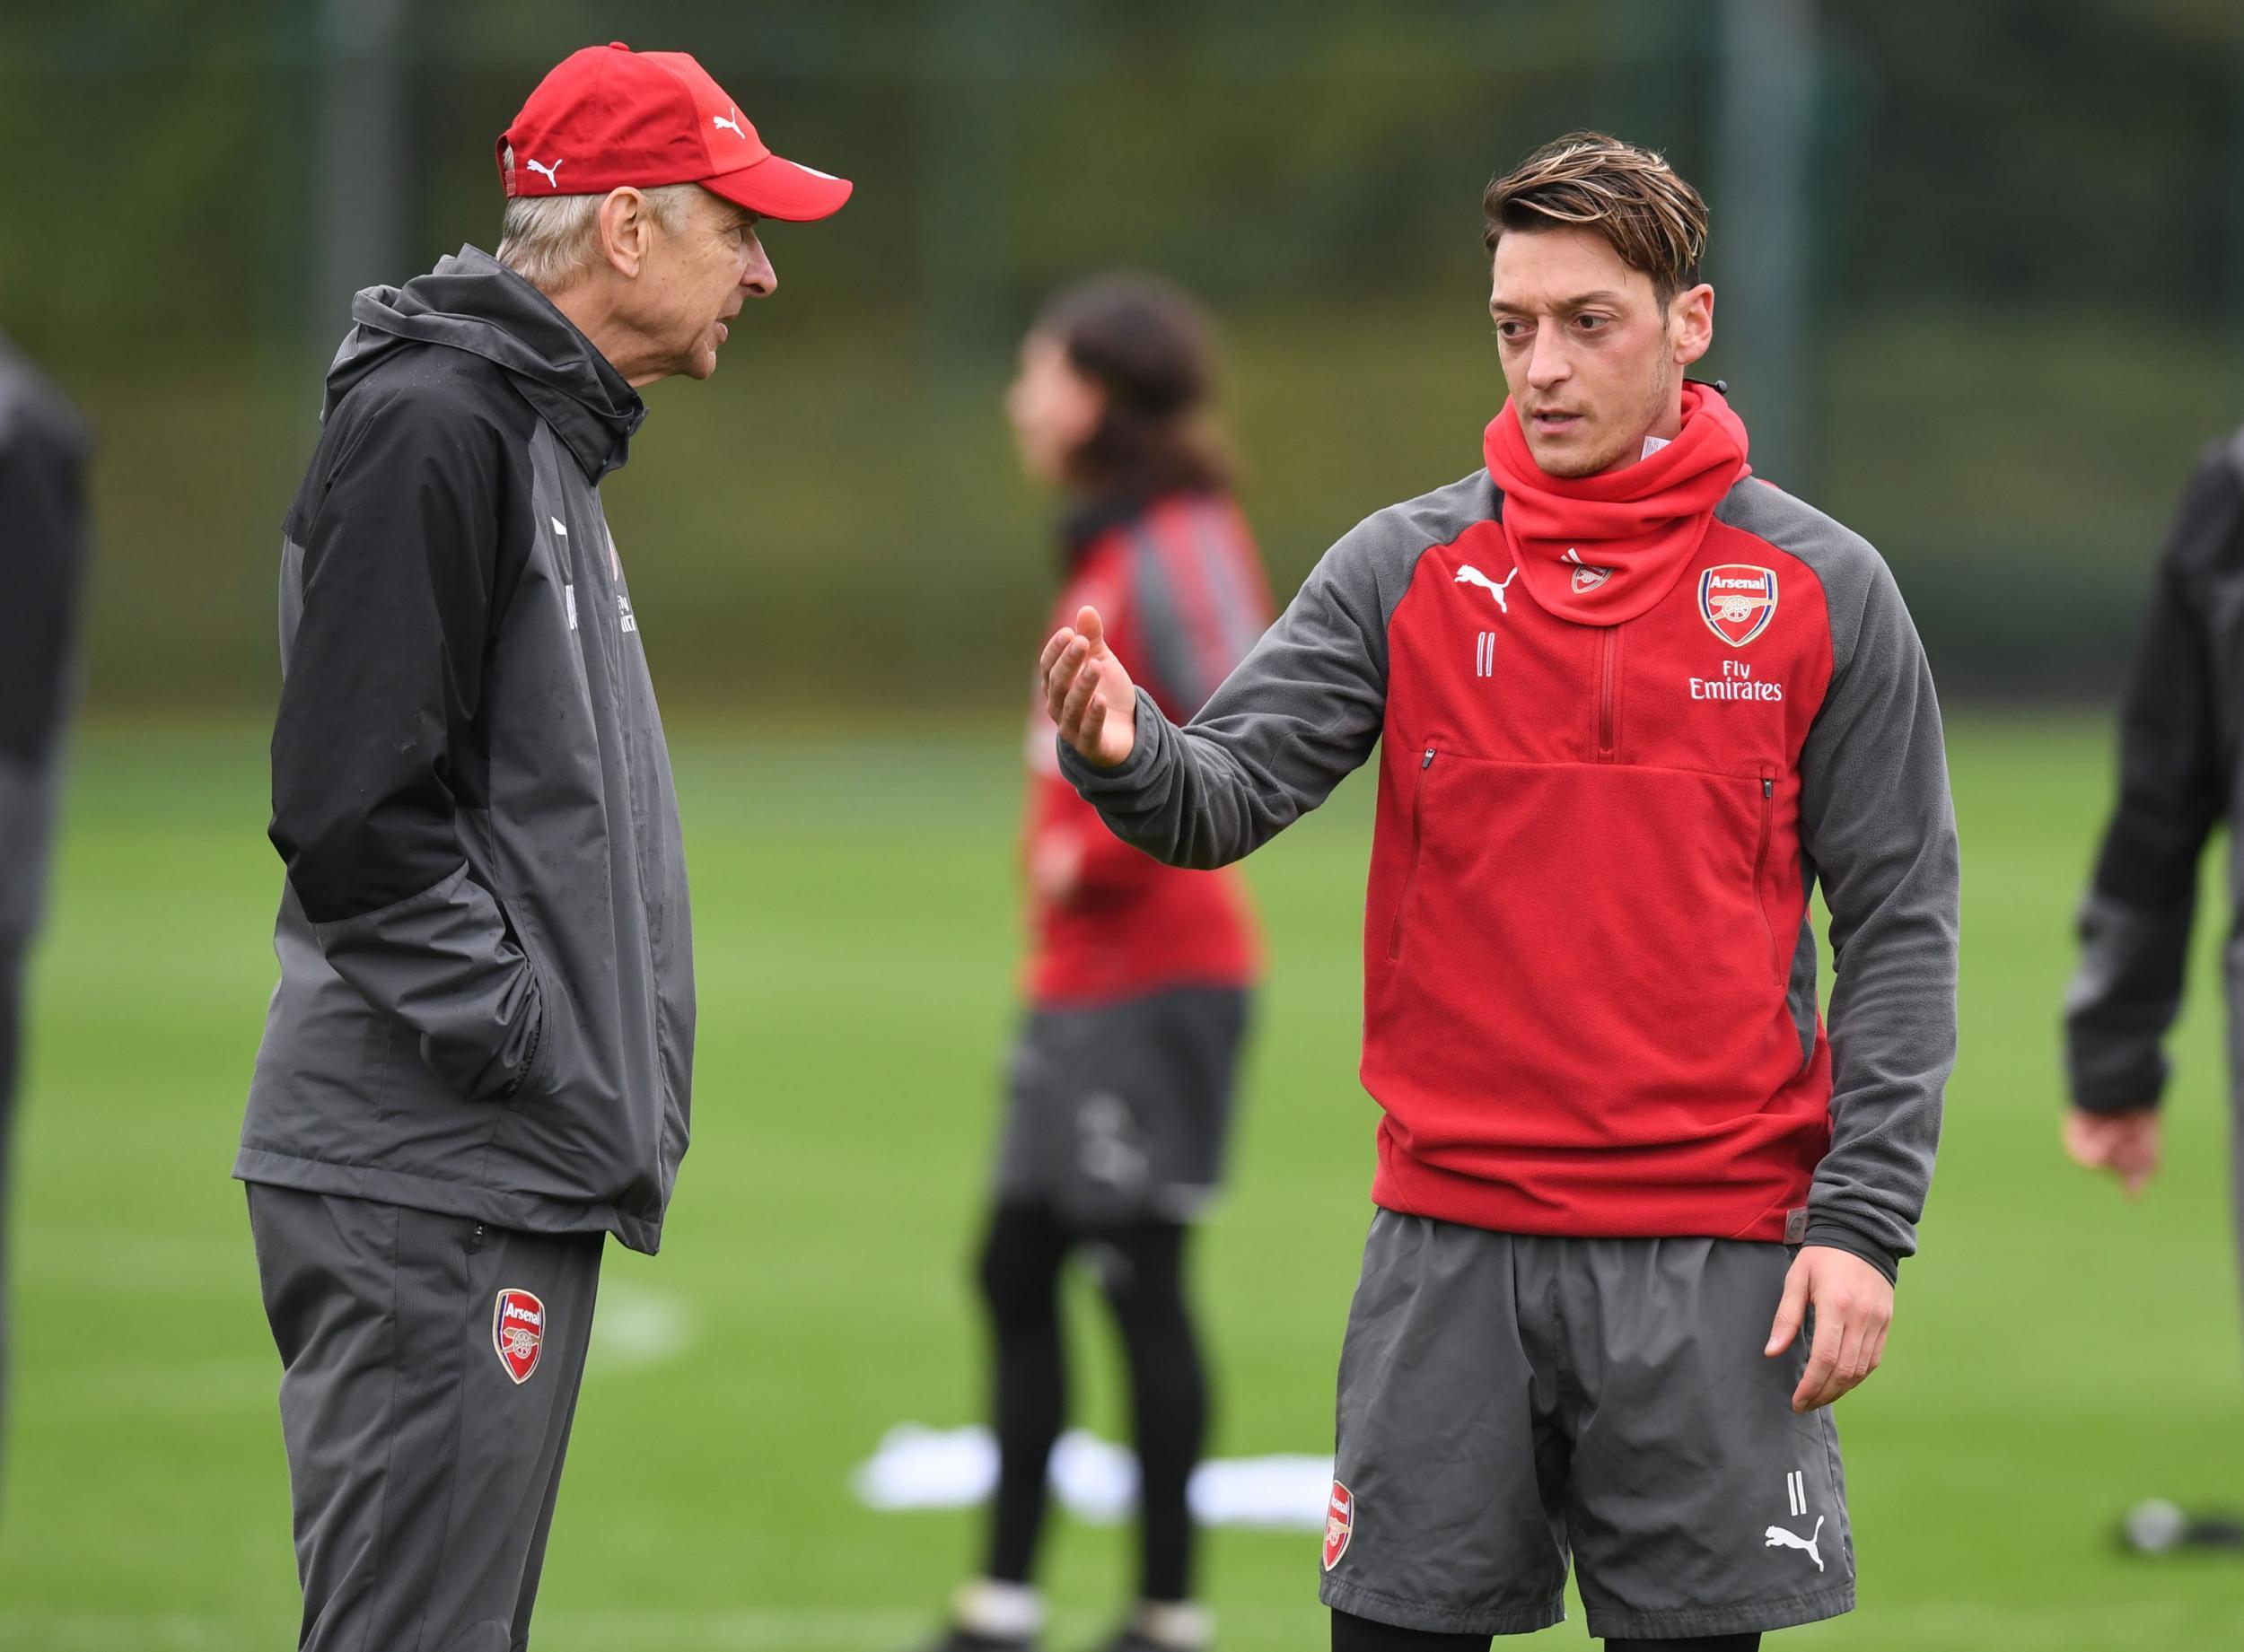 Arsene Wenger in discussion with Mesut Ozil in training